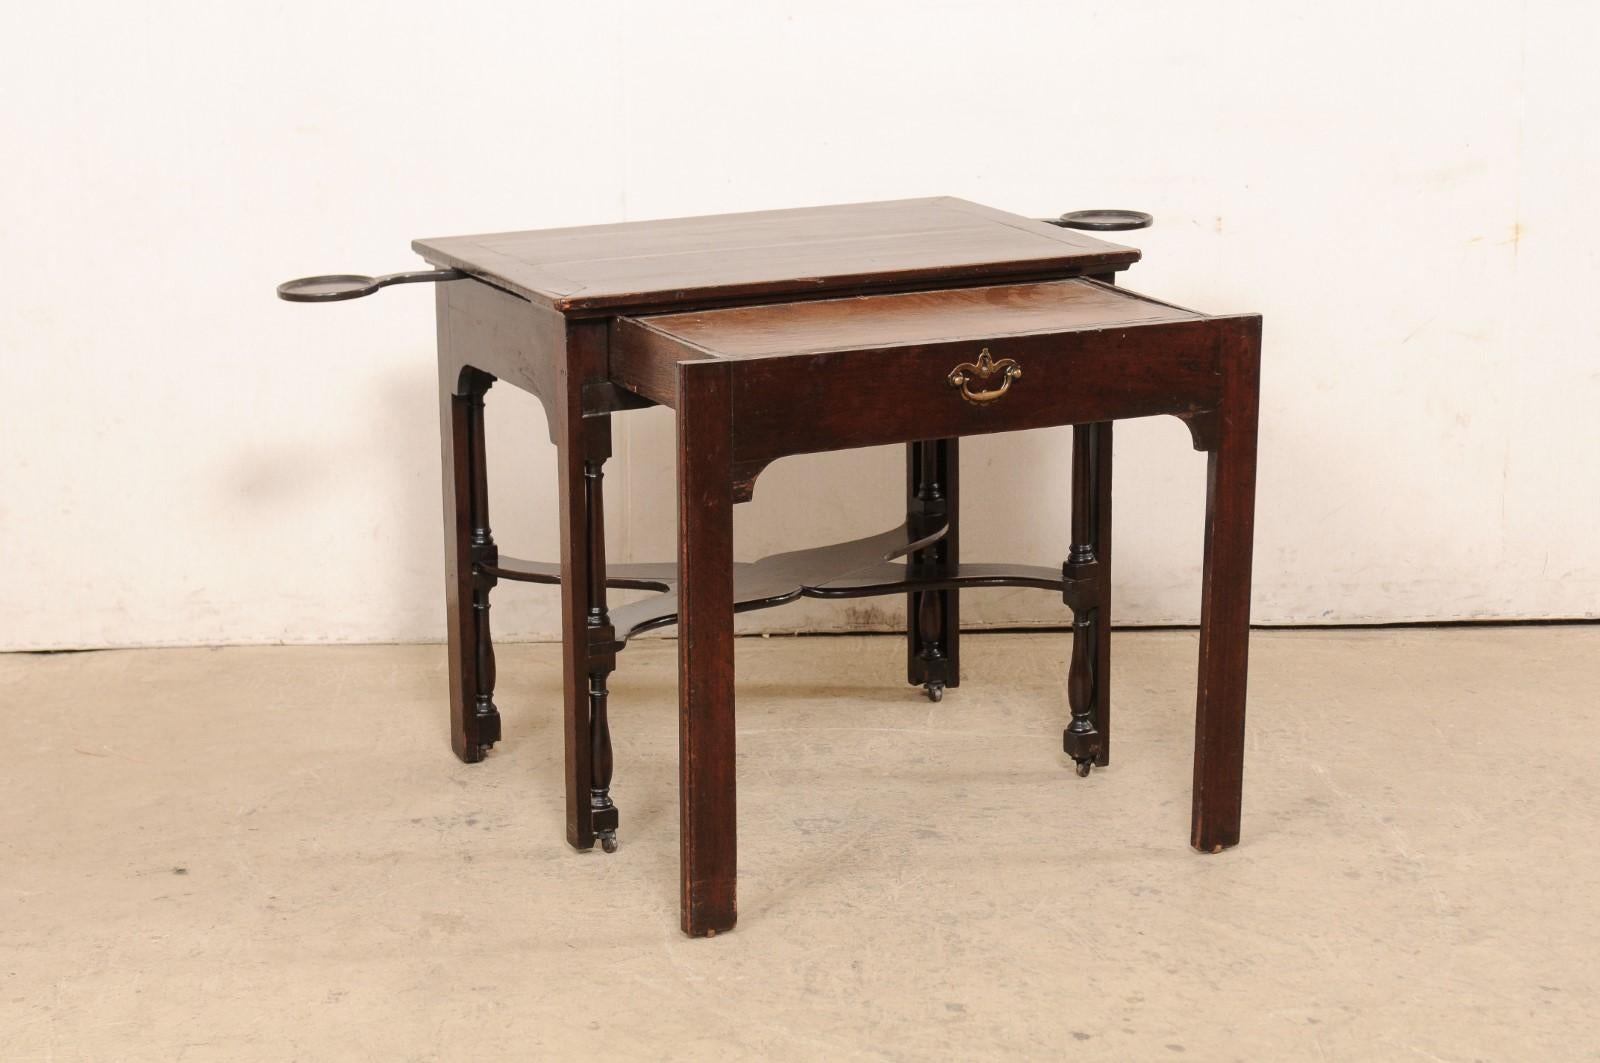 18th Century and Earlier 18th C. English Architect's Table w/Unique Legs, Expanding Top, & Candle Shelves For Sale